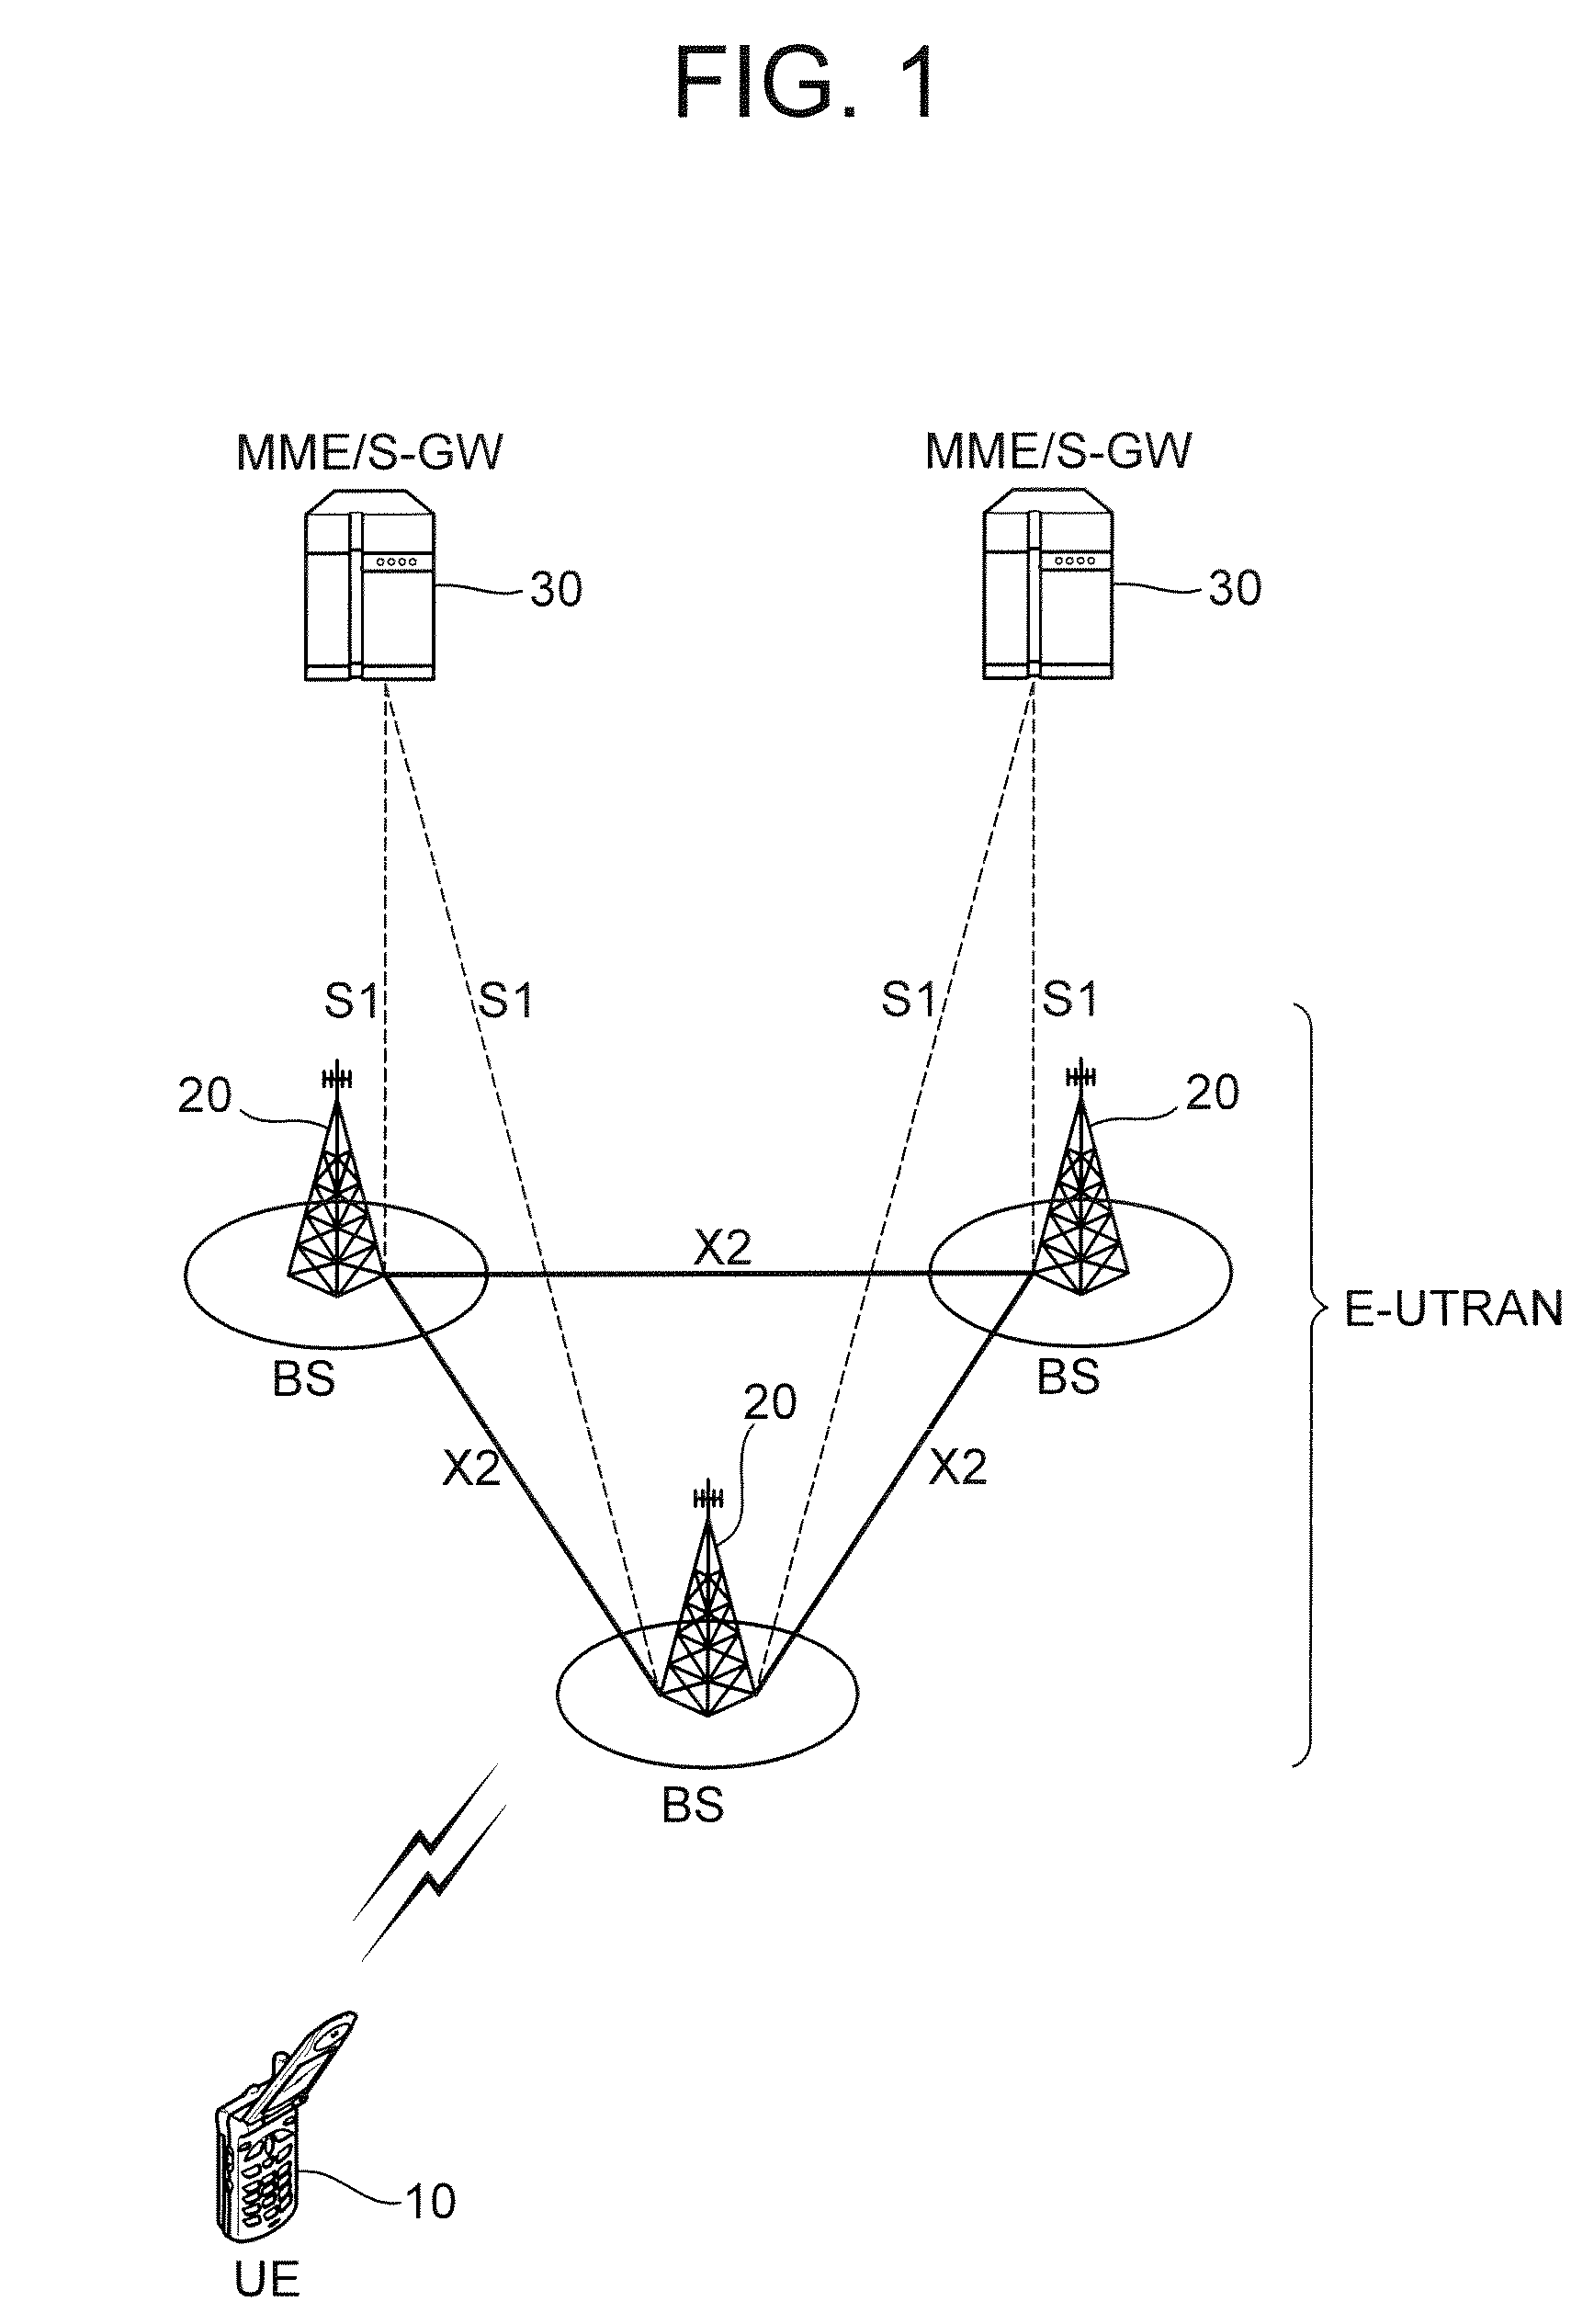 Wireless communication system for monitoring physical downlink control channel